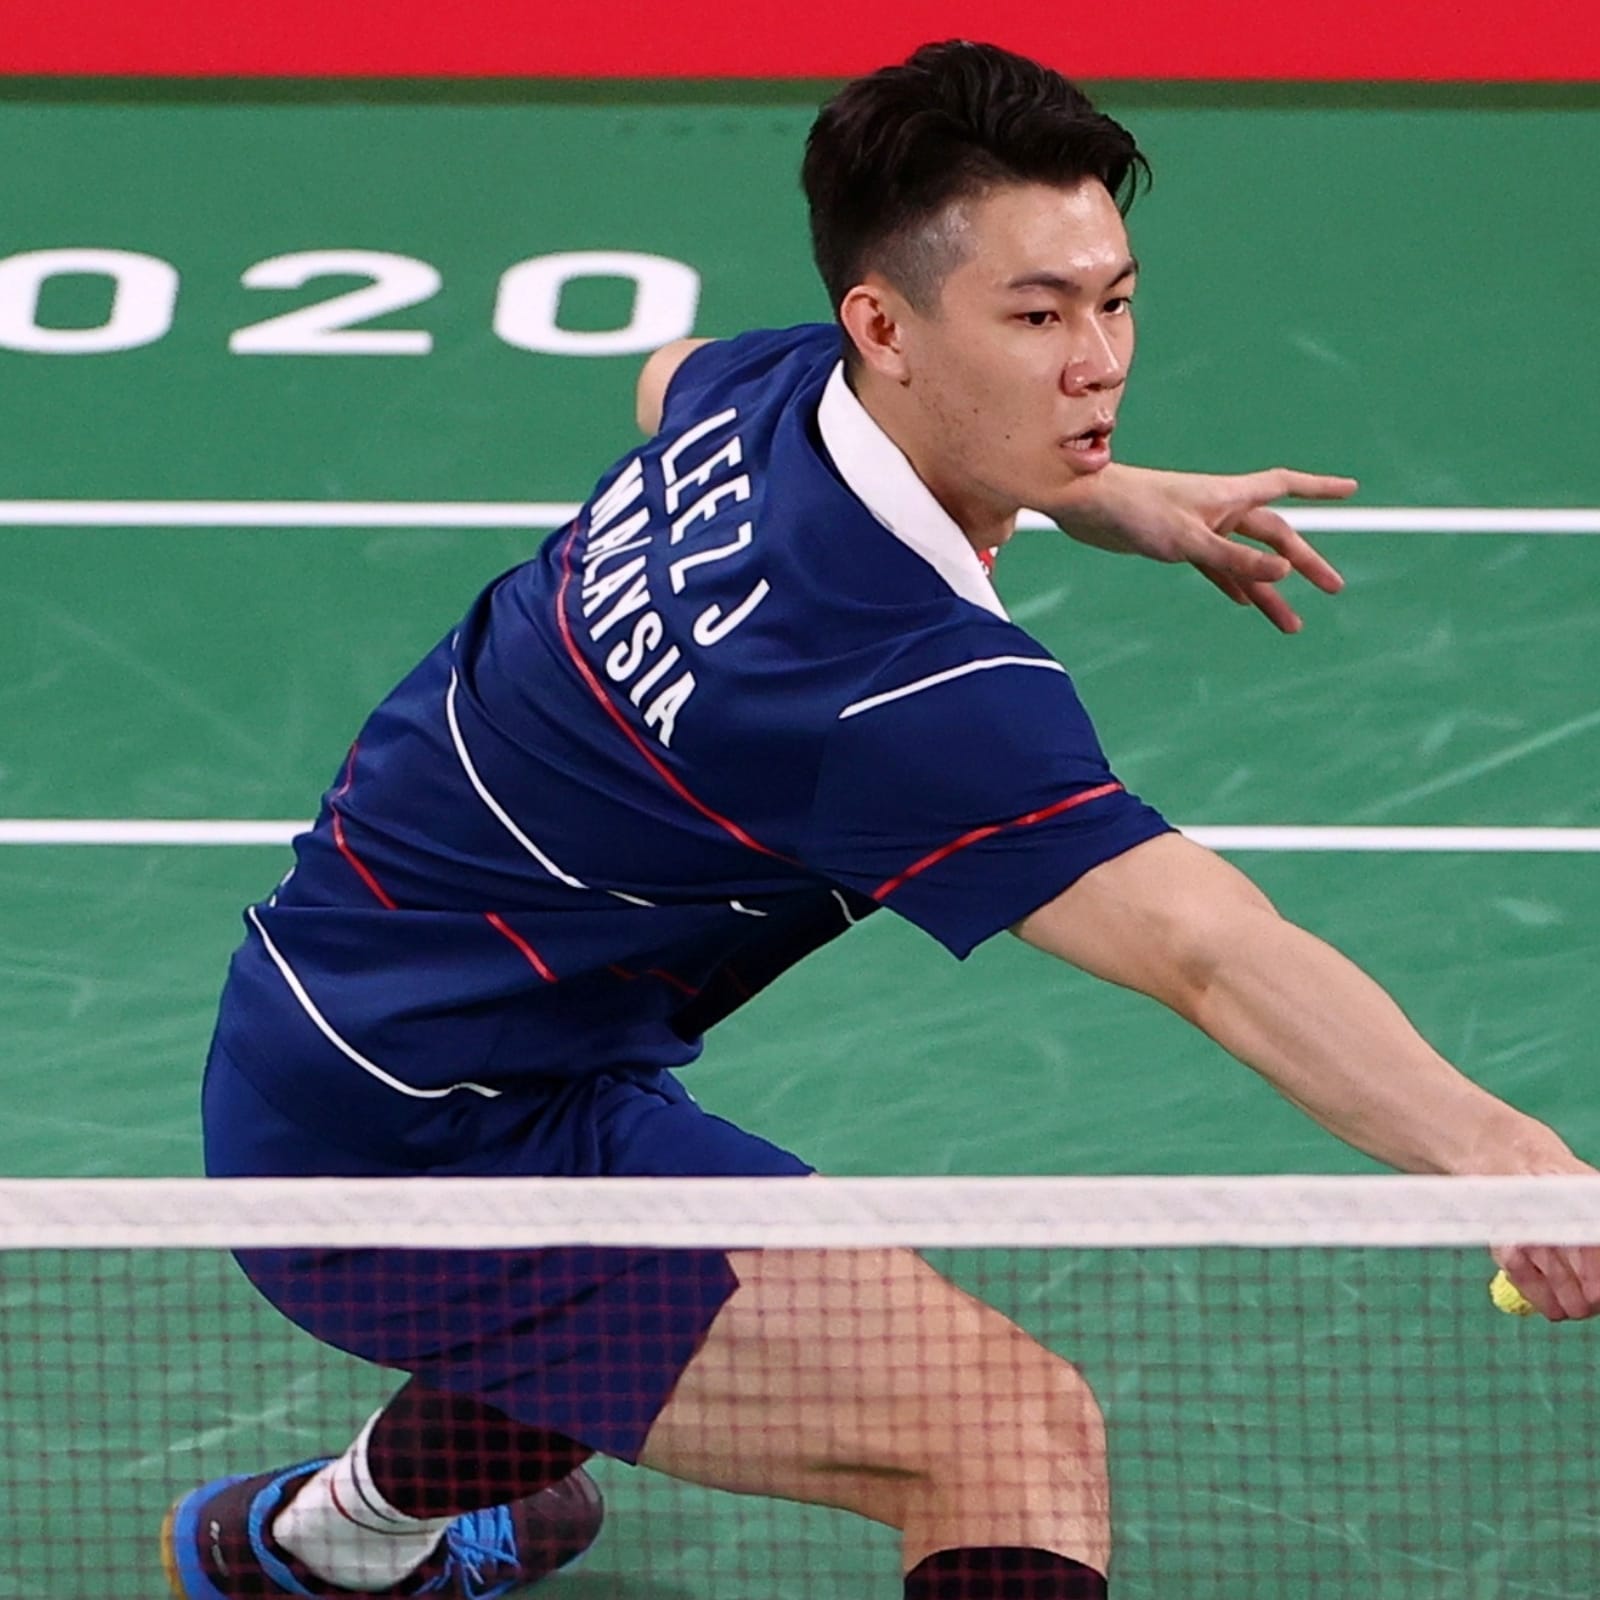 Malaysias Top Badminton Player Lee Zii Jia Quits National Team, to Go Independent